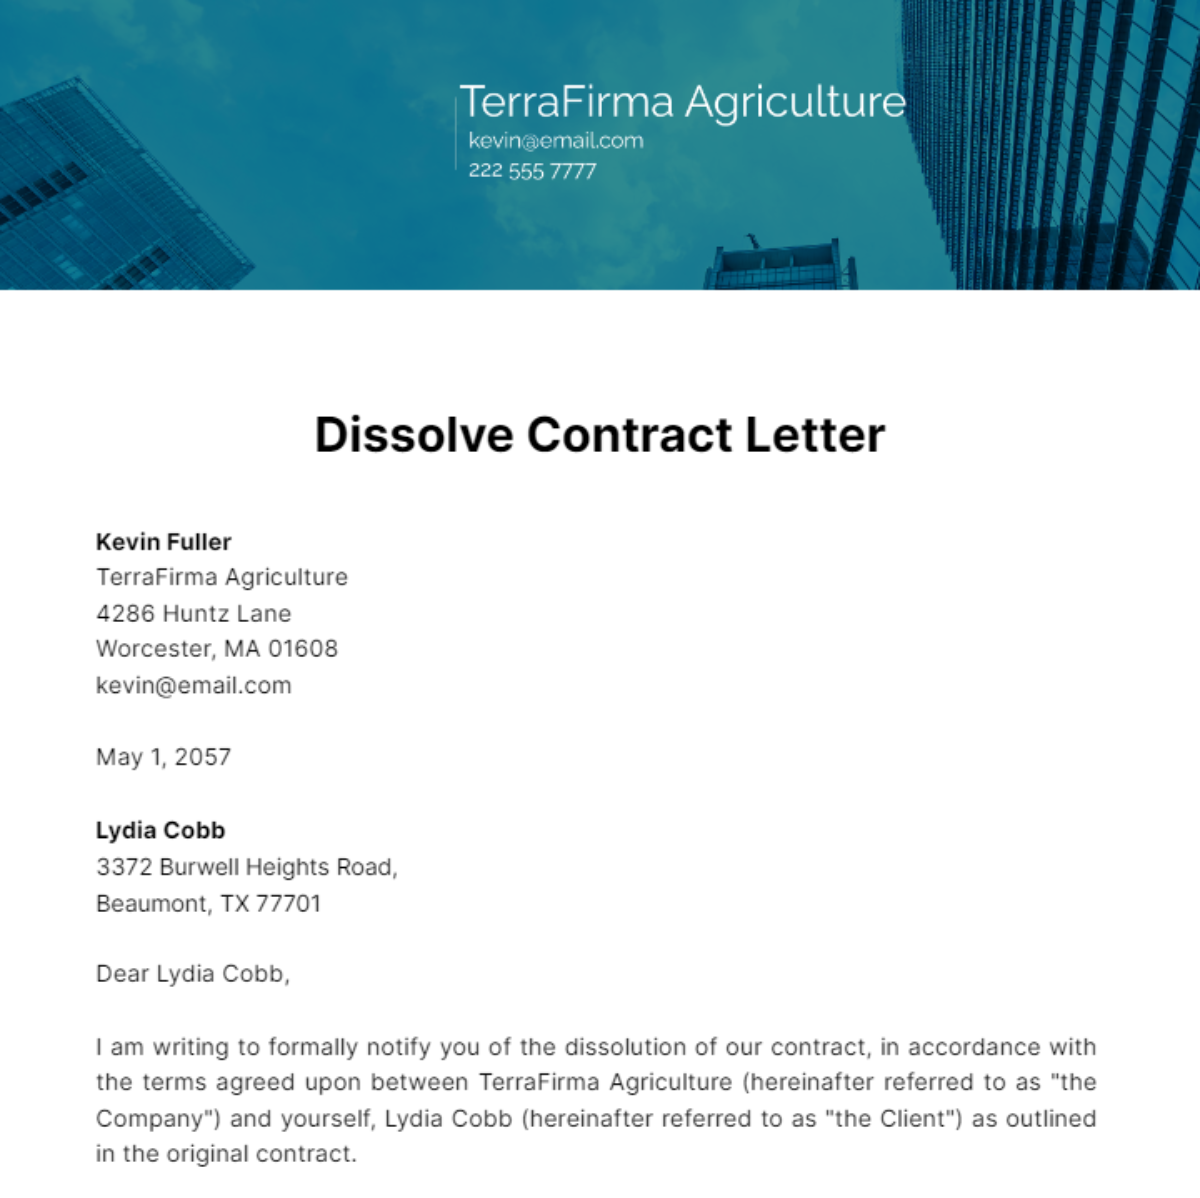 Dissolve Contract Letter Template